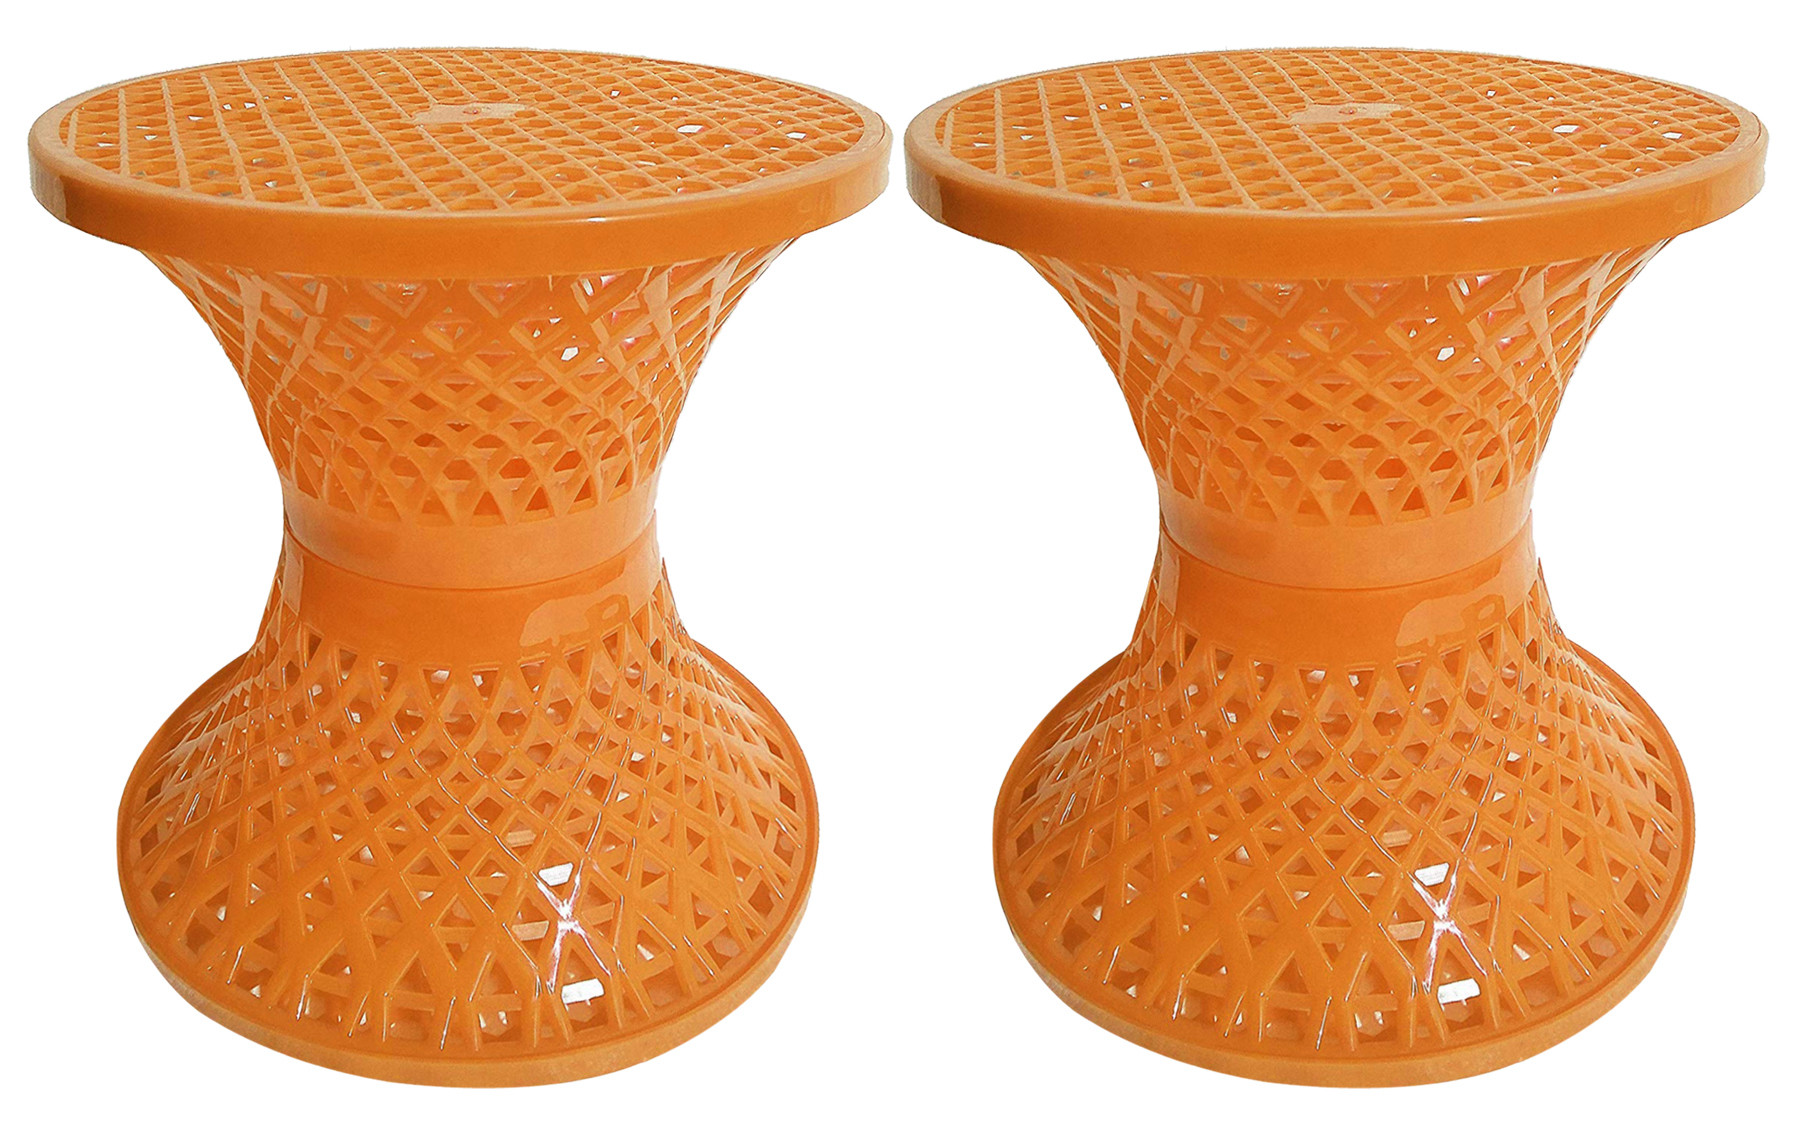 Kuber Industries Mesh Design Both Sided Plastic Sitting Stool, Planter Stand, Sidetable For Living Room, Bed Room, Garden in Damroo Style (Yellow)